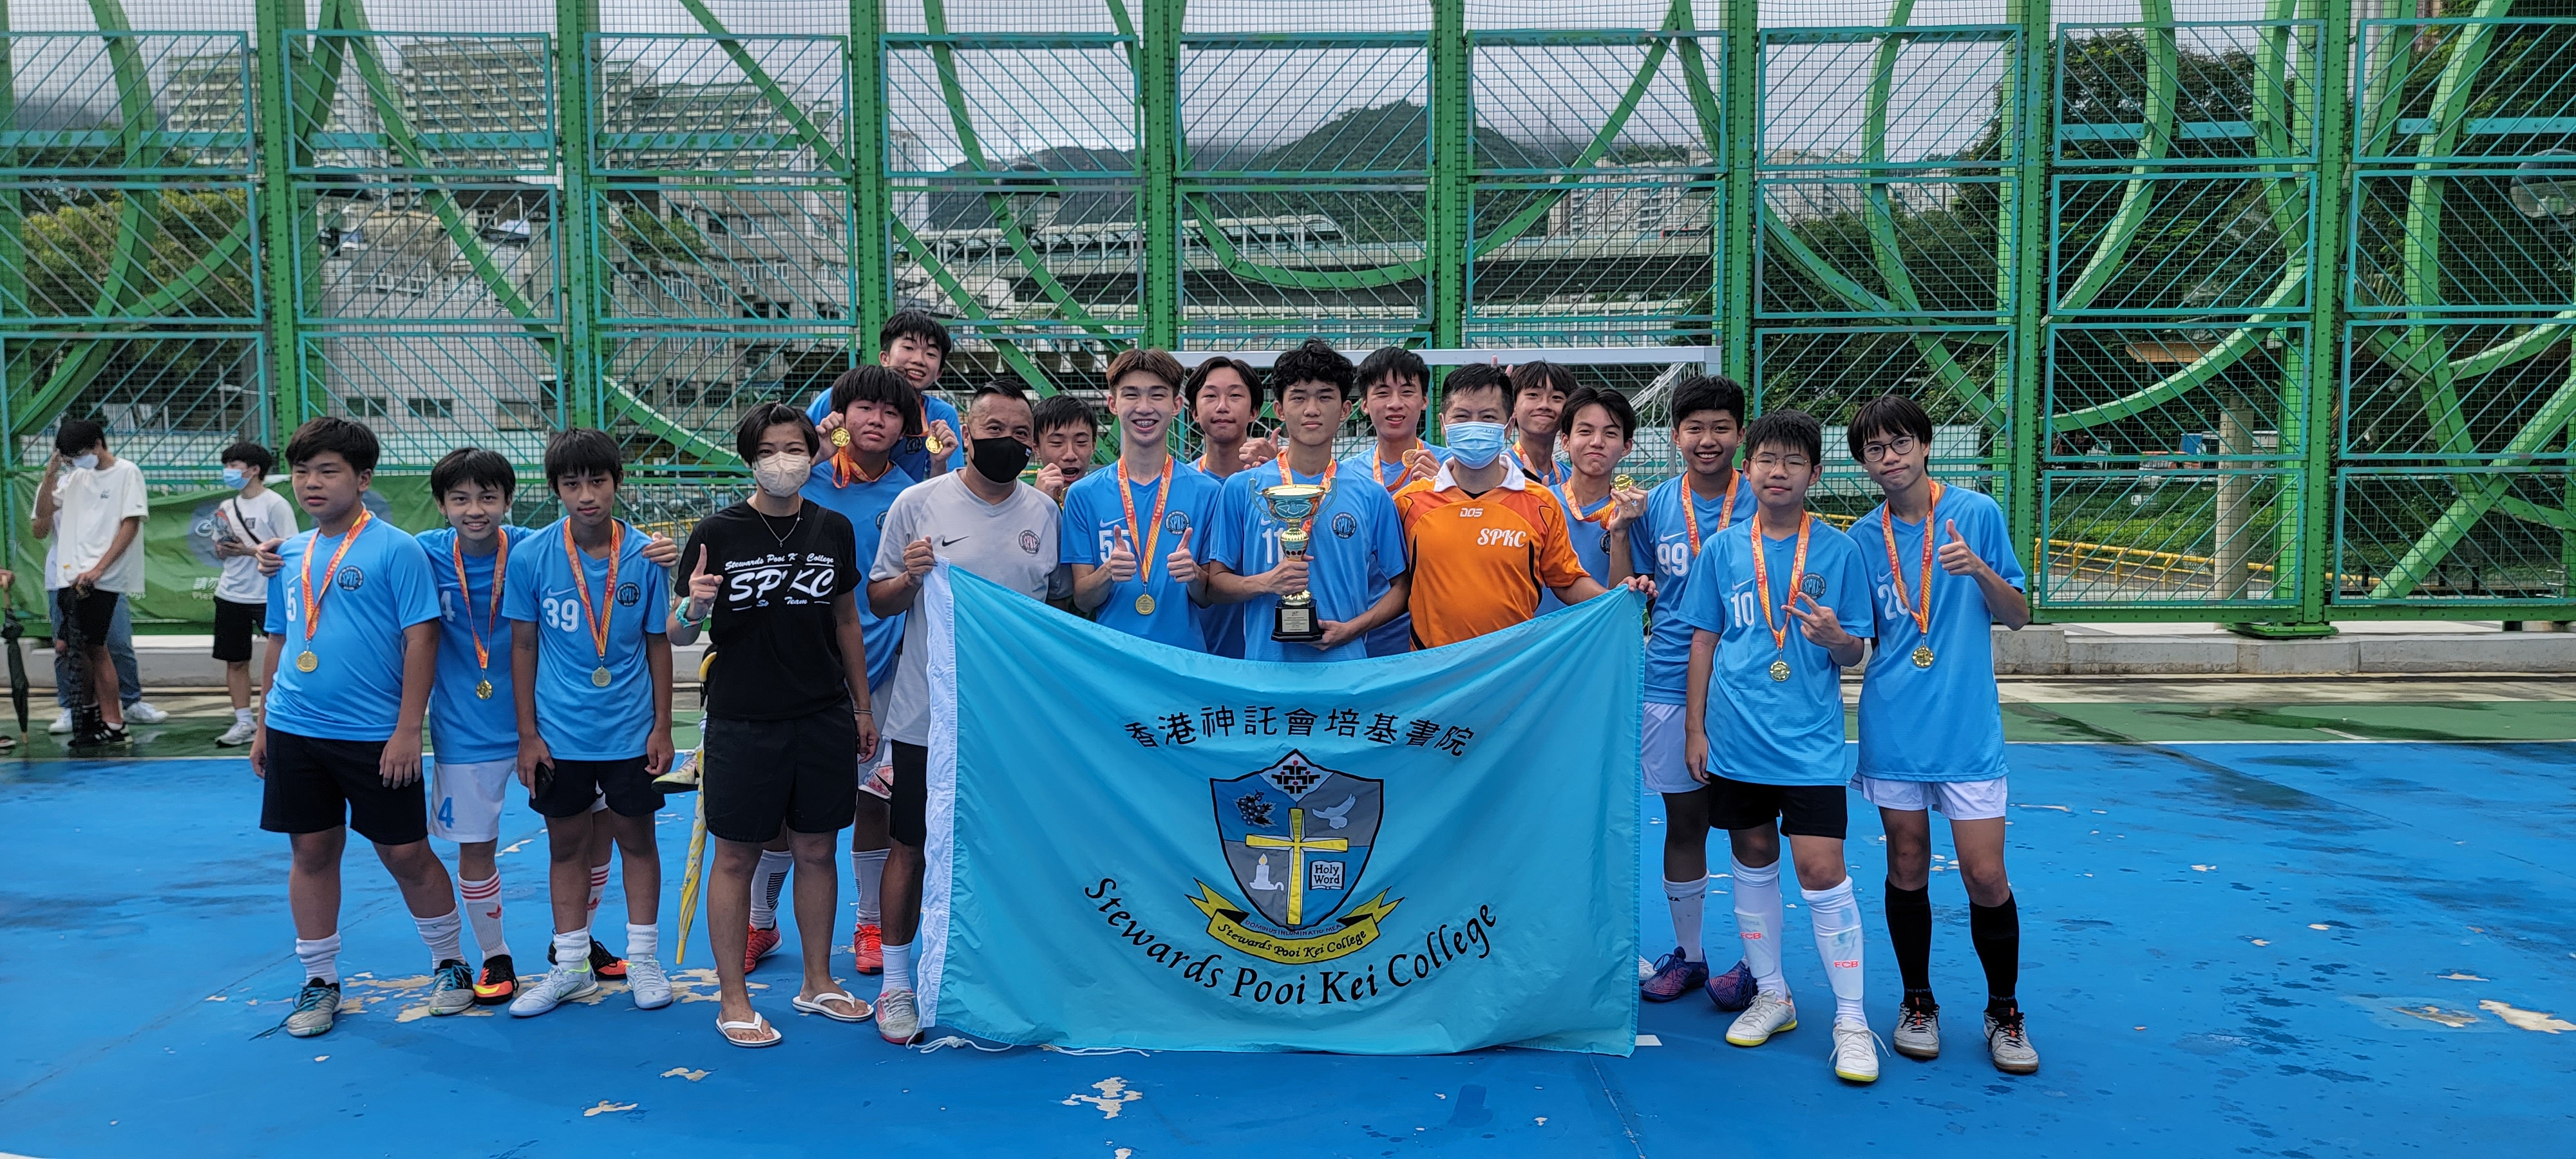 The Championship of Inter-school 5-a-side-Football Competition